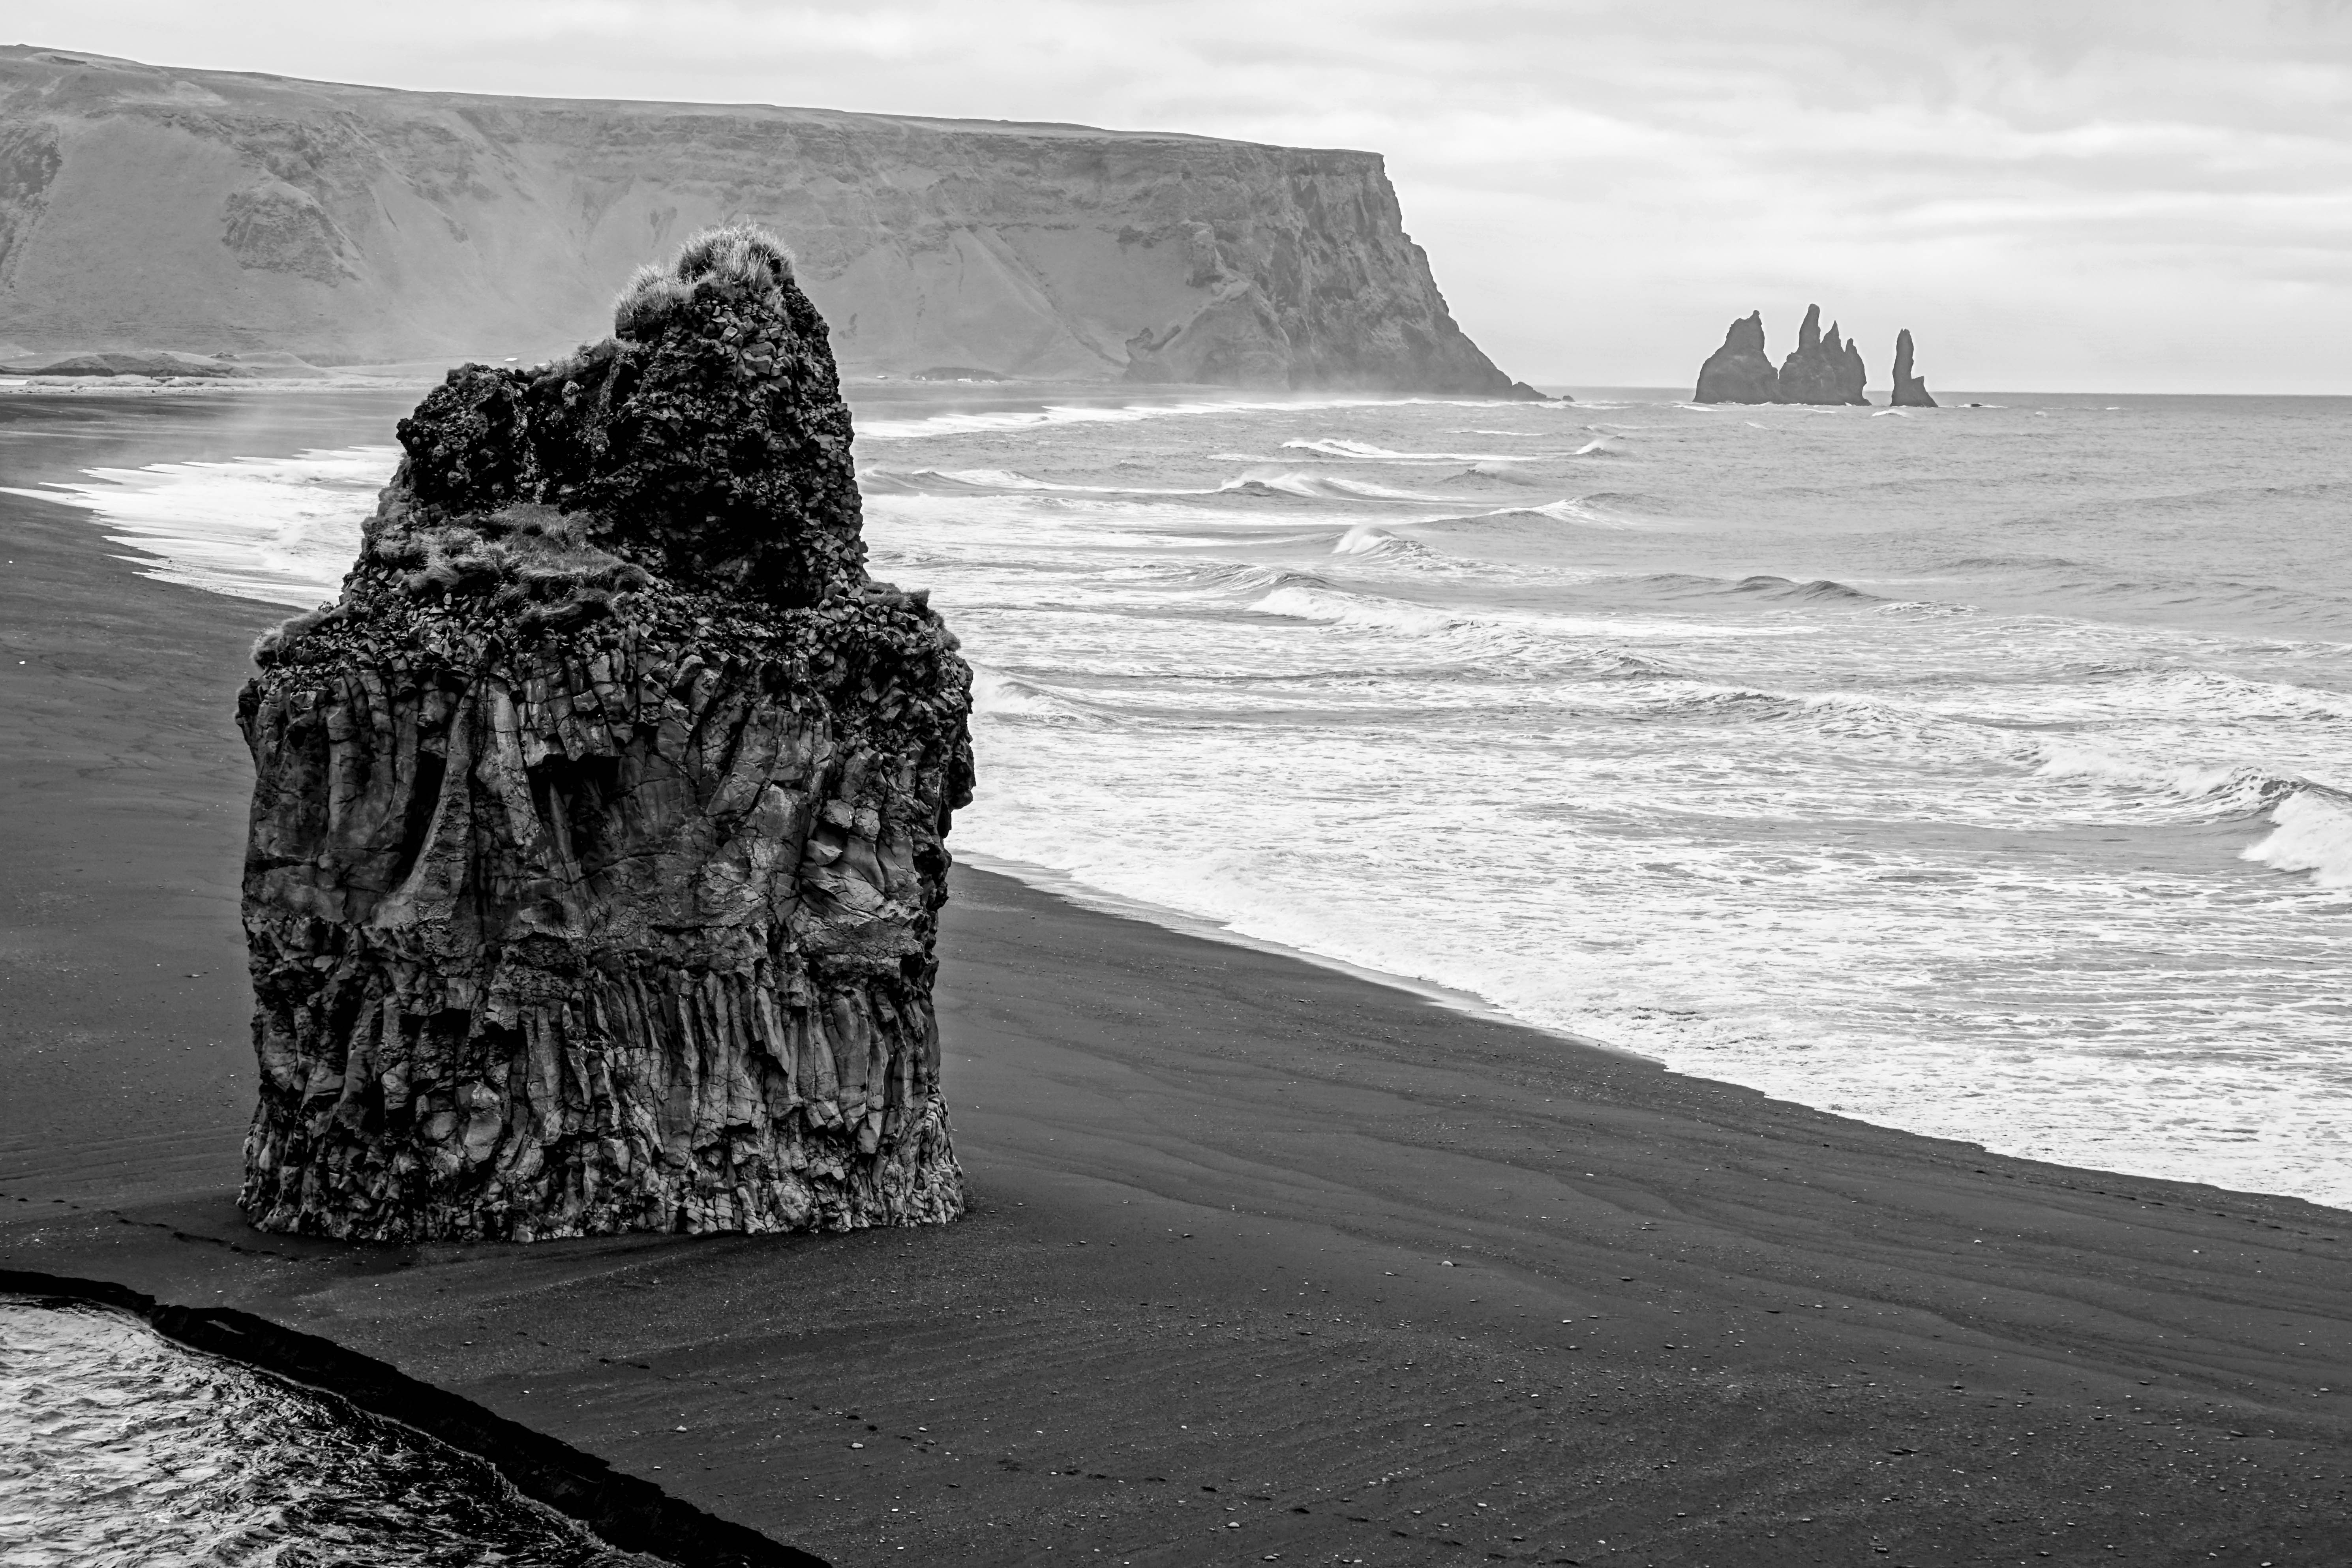 South Iceland must visit places - Reynisfjara black sand beach // Iceland trip planning made easy with TripCreator.com | Life With a Viwe